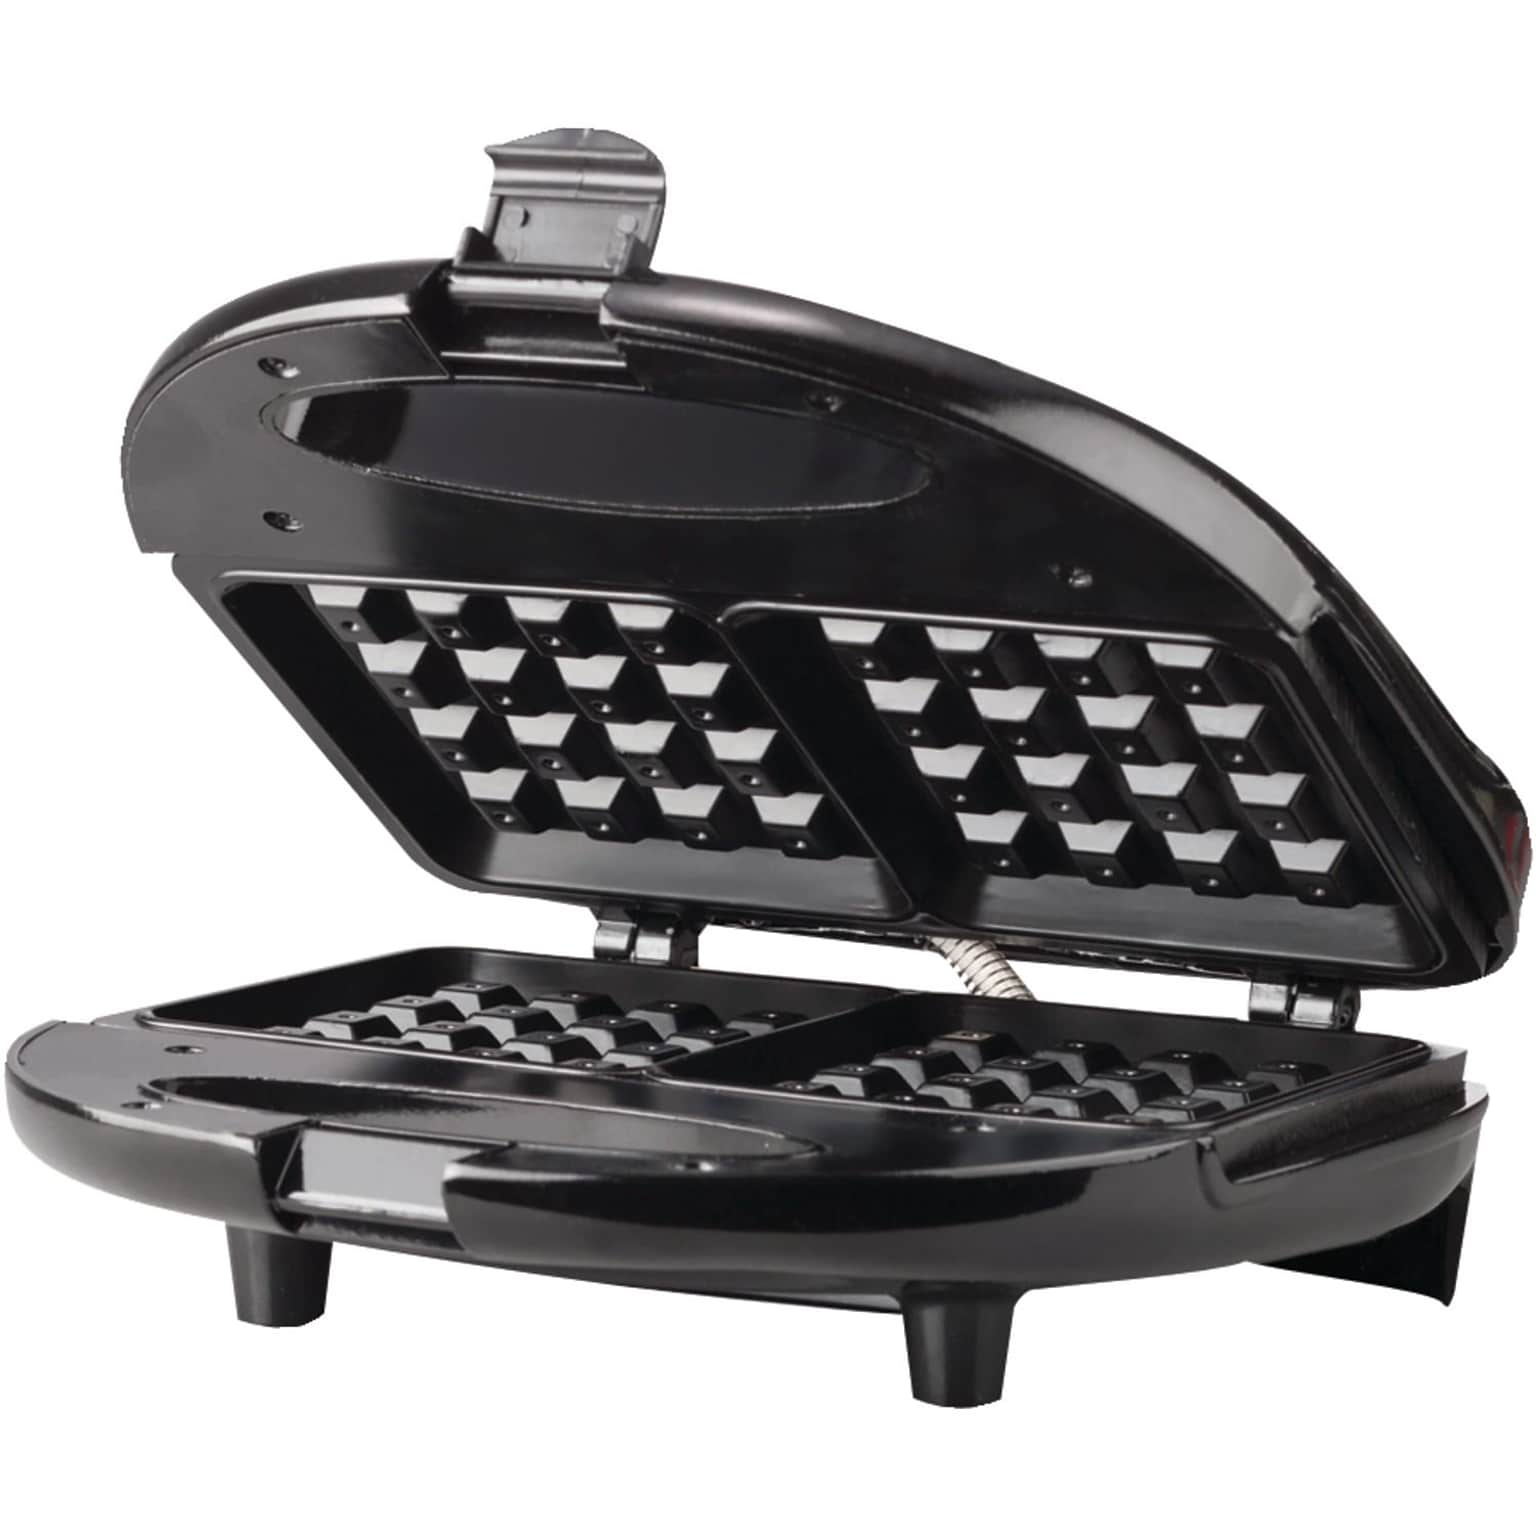 Brentwood Dual Non-Stick Waffle Maker, Black/Stainless Steel (TS-243)